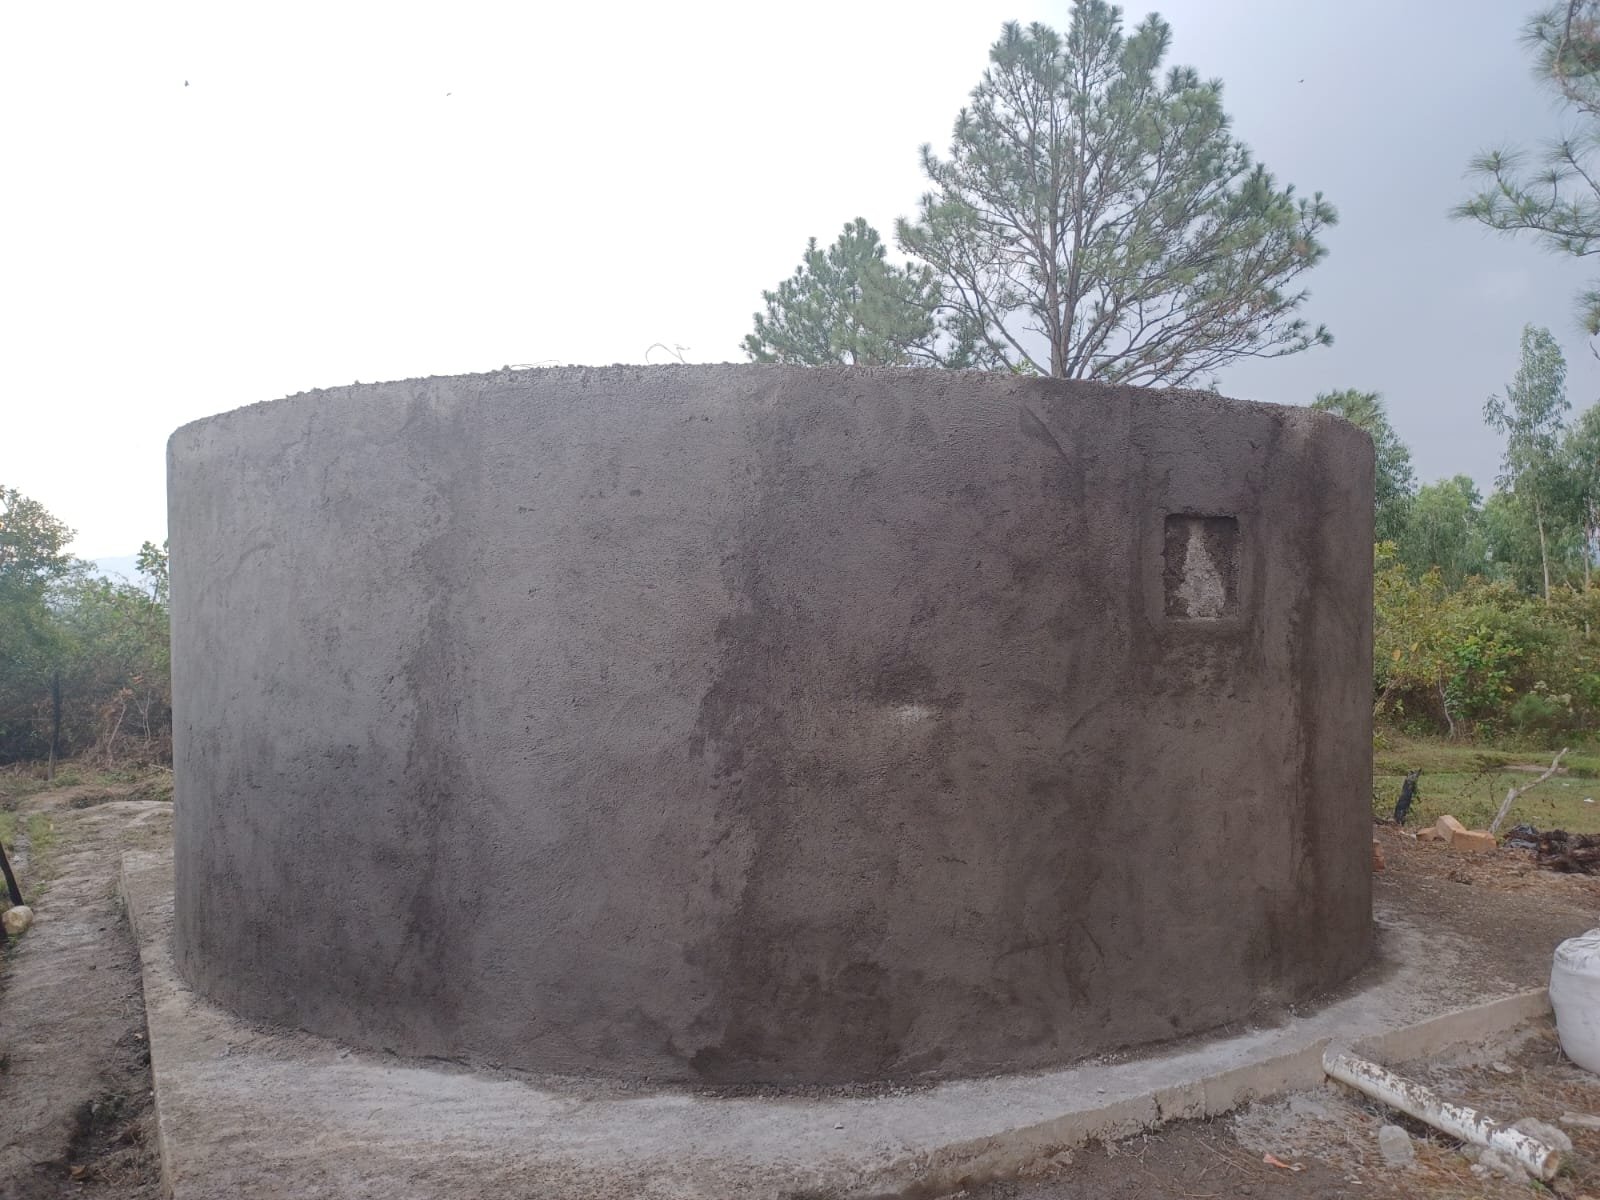 view of tank from side with walls complete.jpeg